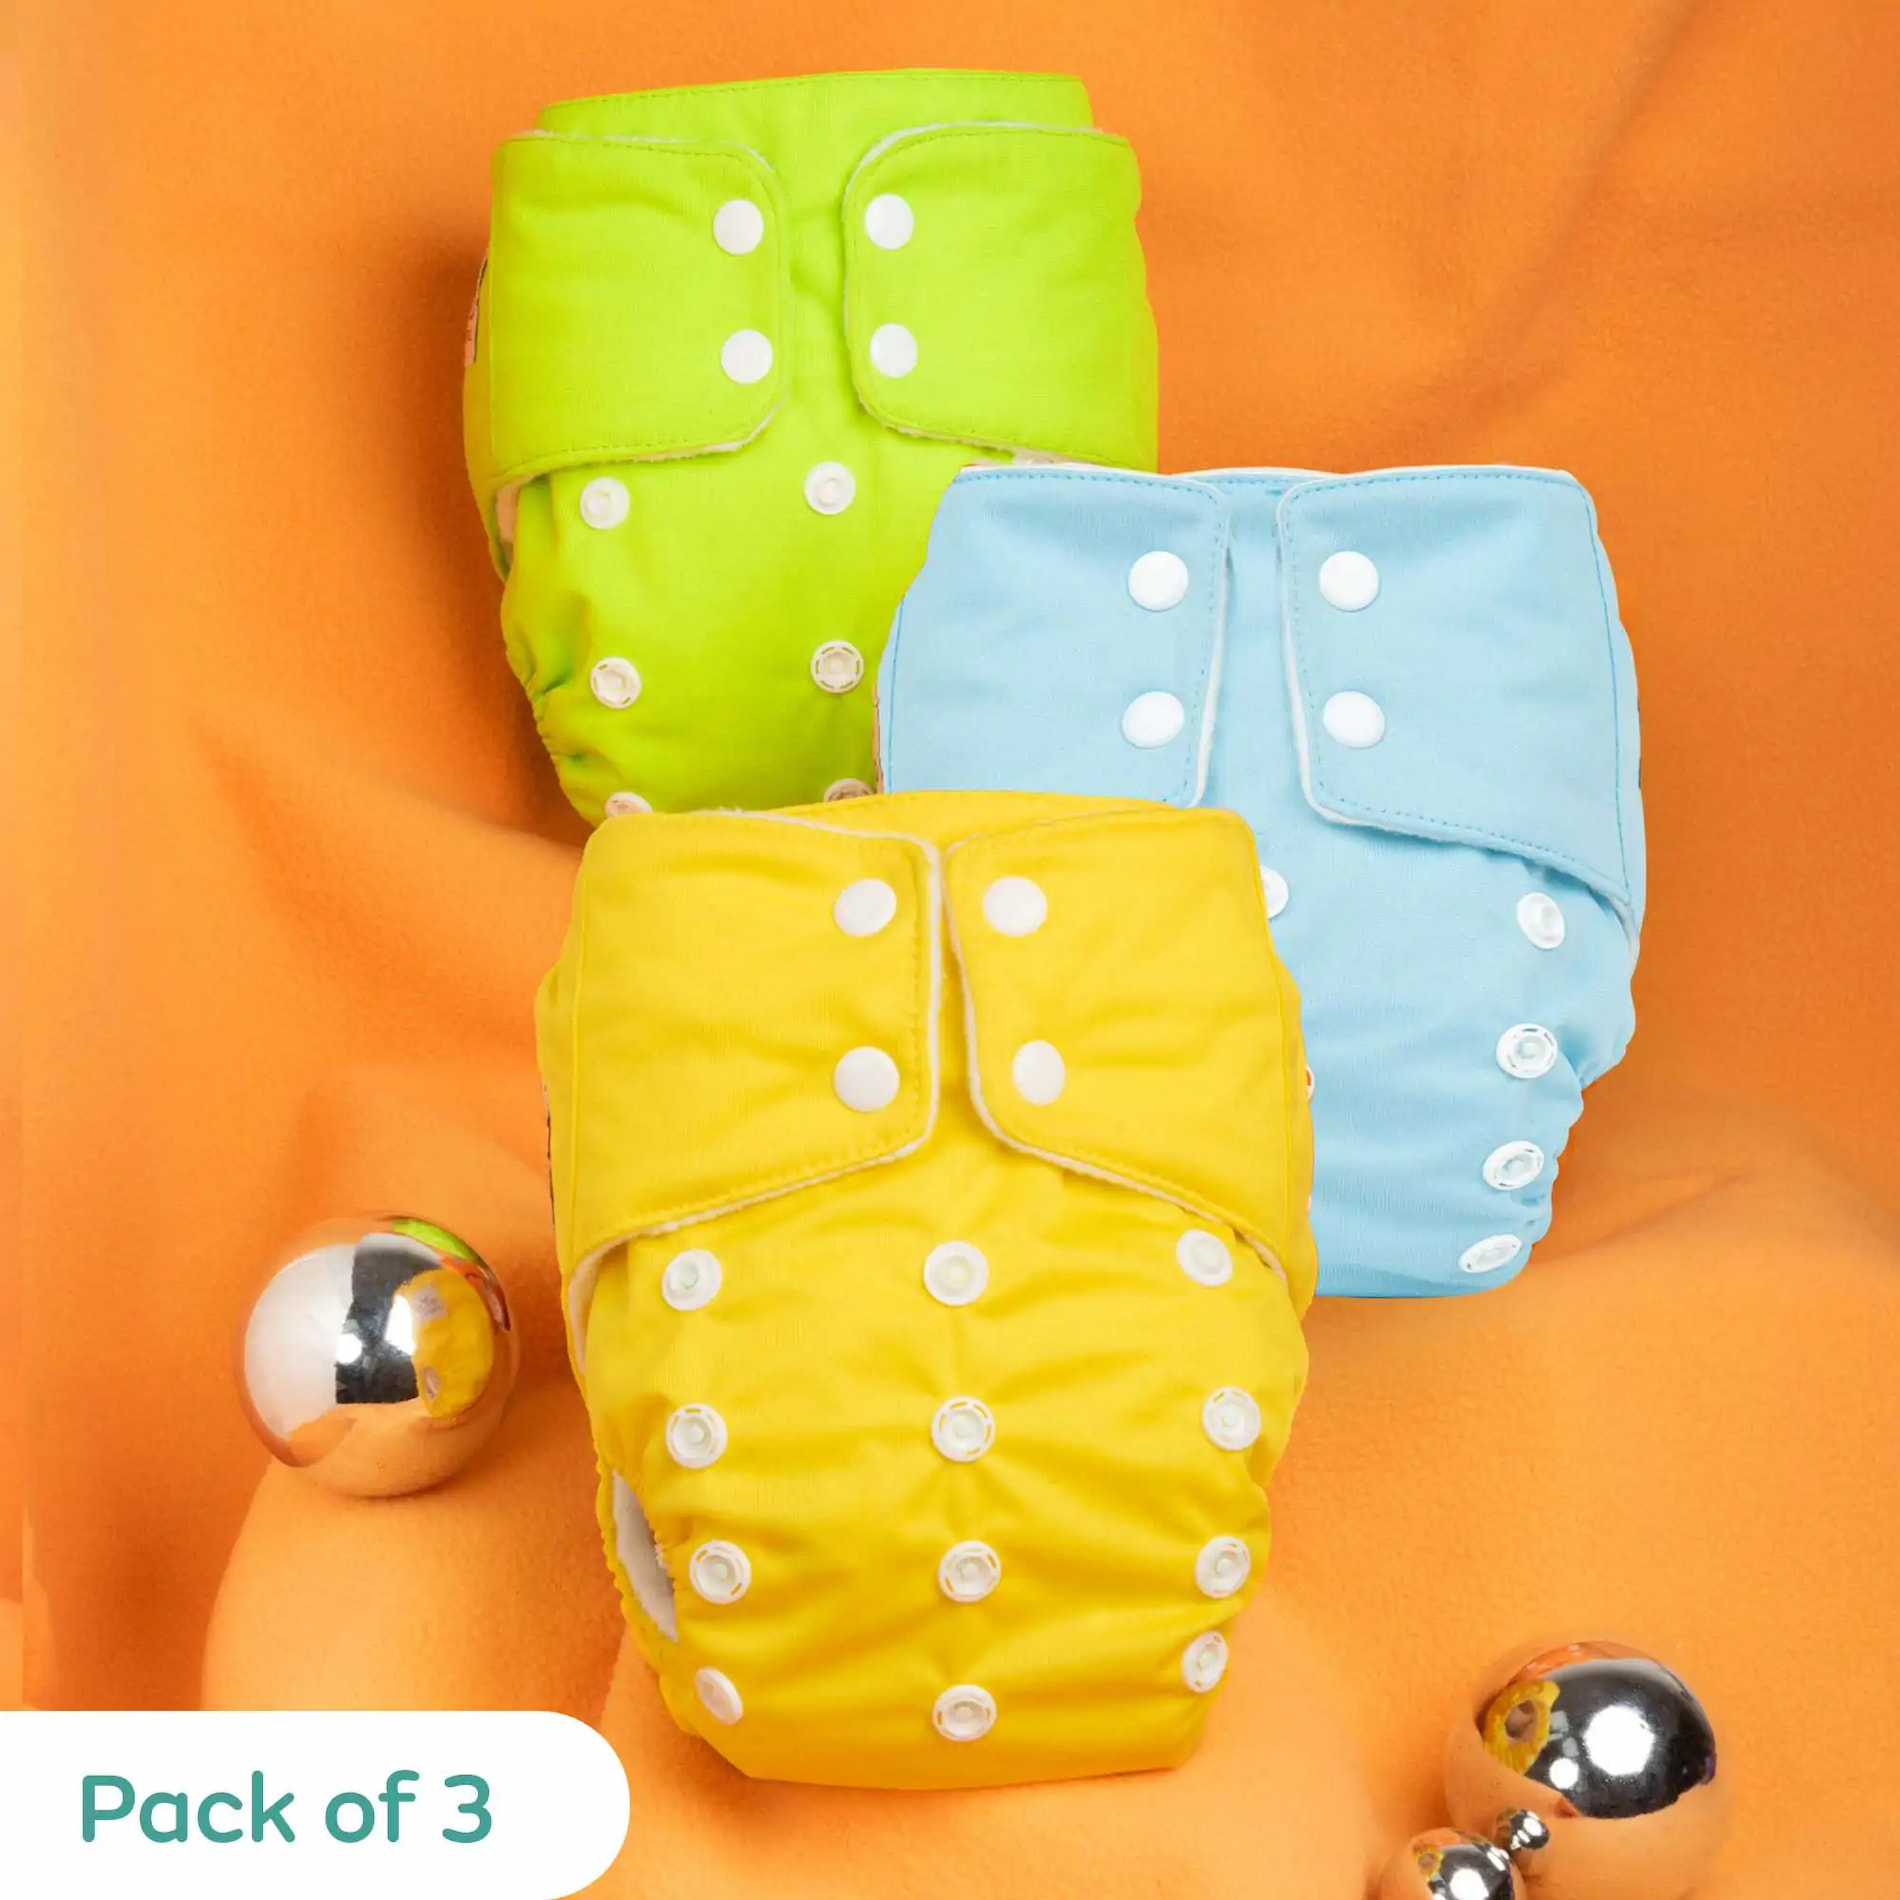 Adjustable Washable & Reusable Cloth Diaper With Dry Feel, Absorbent Insert Pad (3M-3Y) | Oeko-Tex Certified | Prevents Rashes - Yellow, Green & Blue - Pack of 3